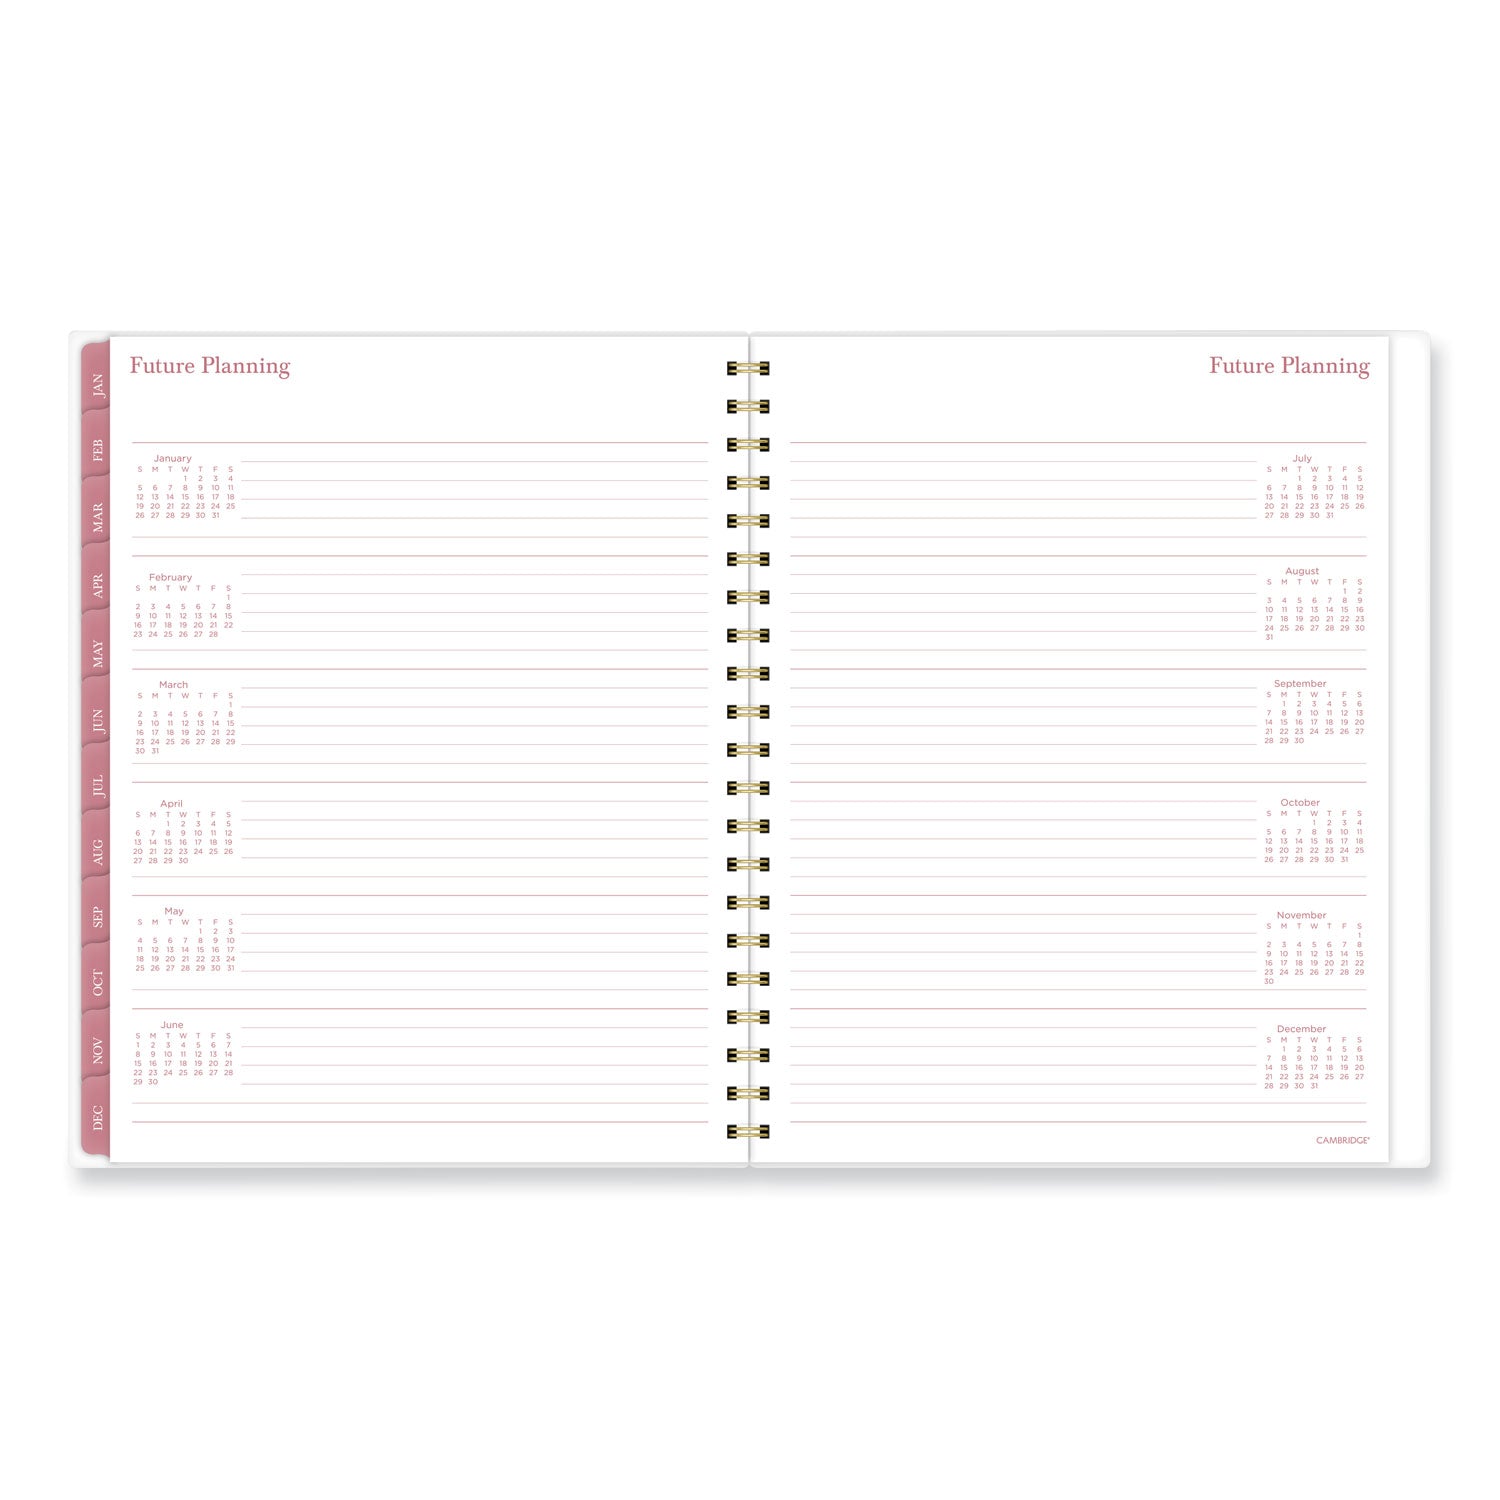 Cambridge Thicket Weekly/Monthly Planner - Large Size - Weekly, Monthly - 12 Month - January 2024 - December 2024 - 8 1/2" x 11" Sheet Size - Wire Bound - Multi - To-do List, Durable, Flexible, Snag Resistant, Double-sided Pocket, Dated Planning Page - 2